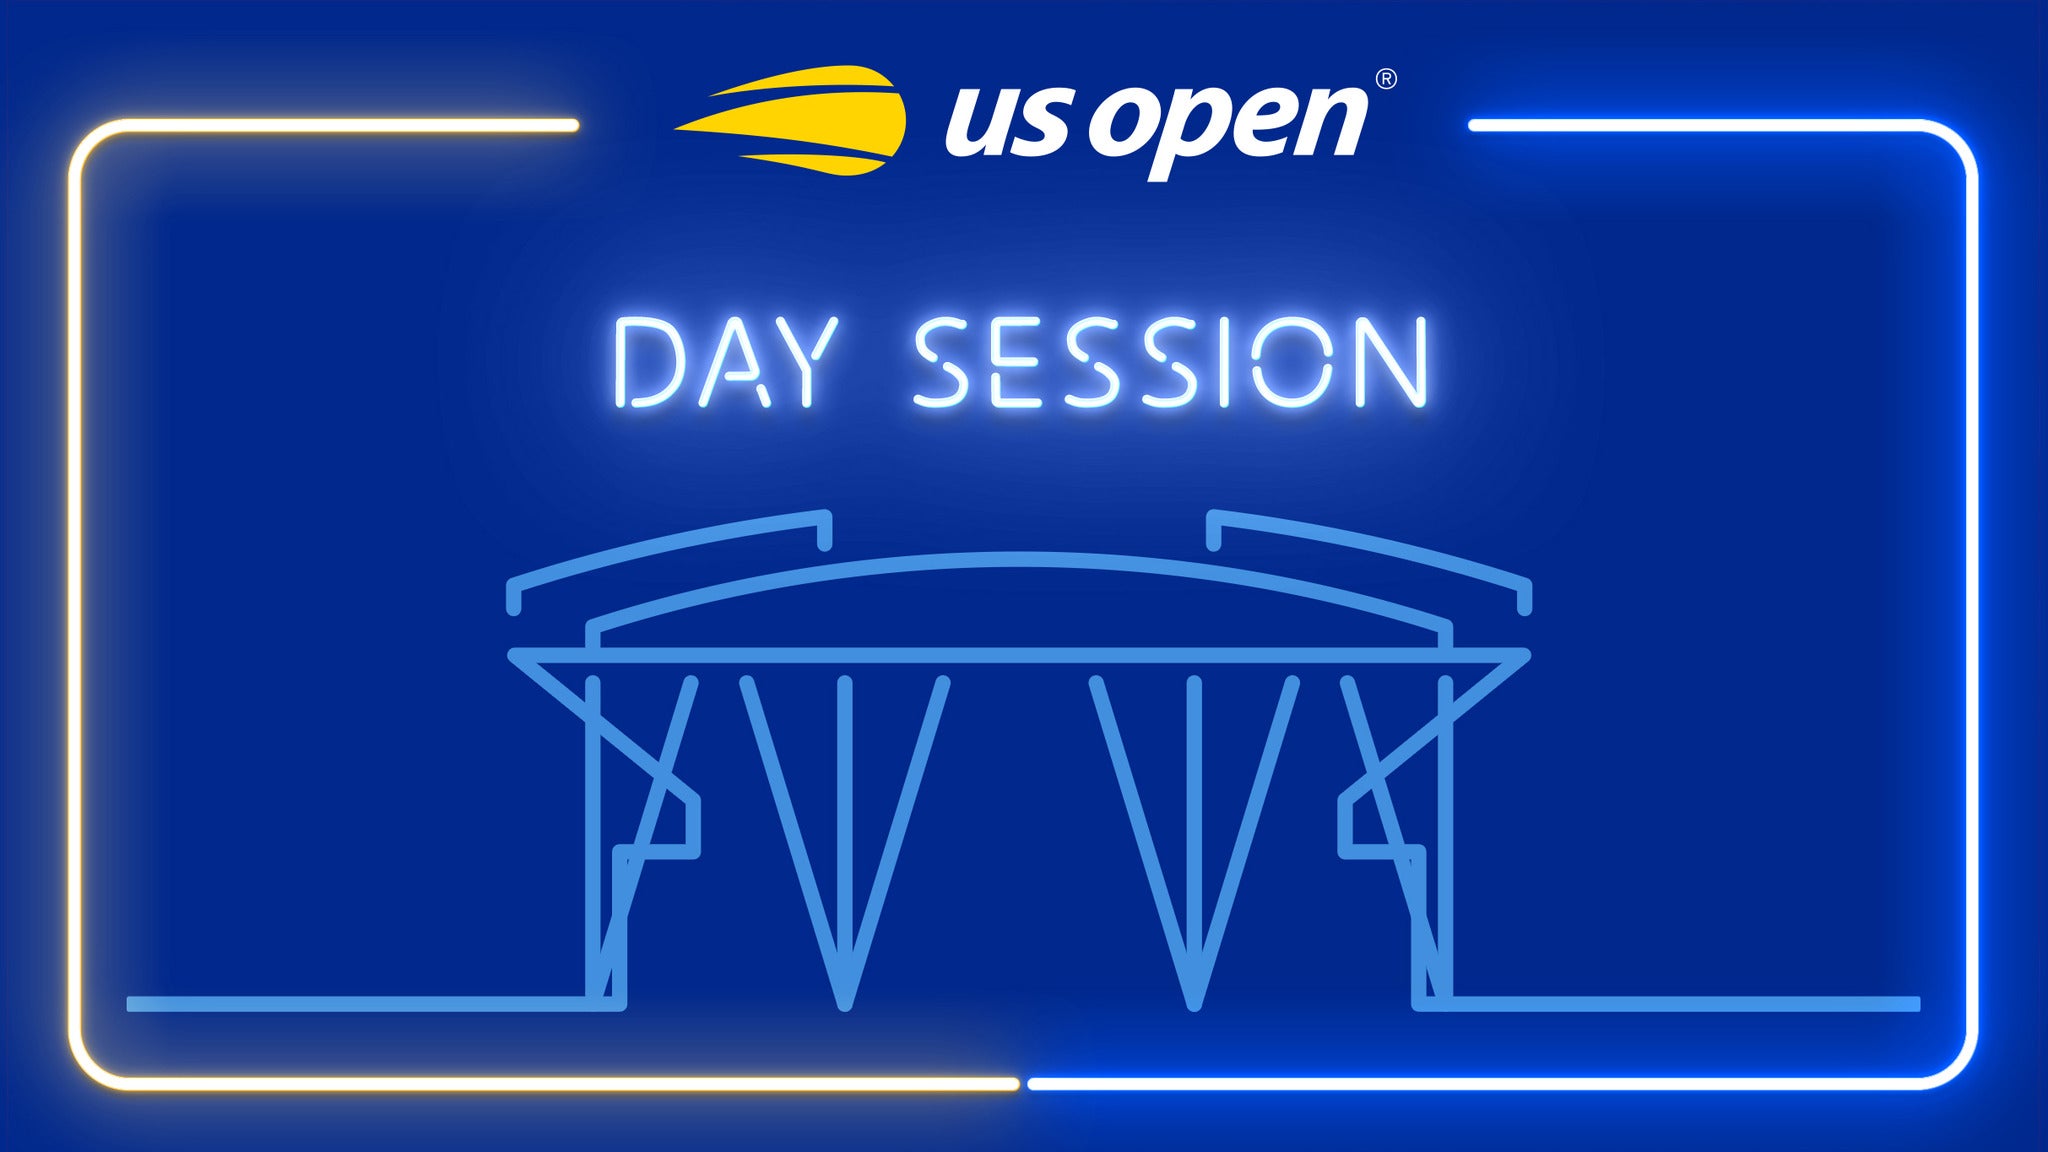 Image used with permission from Ticketmaster | US Open Day Session (Arthur Ashe) tickets